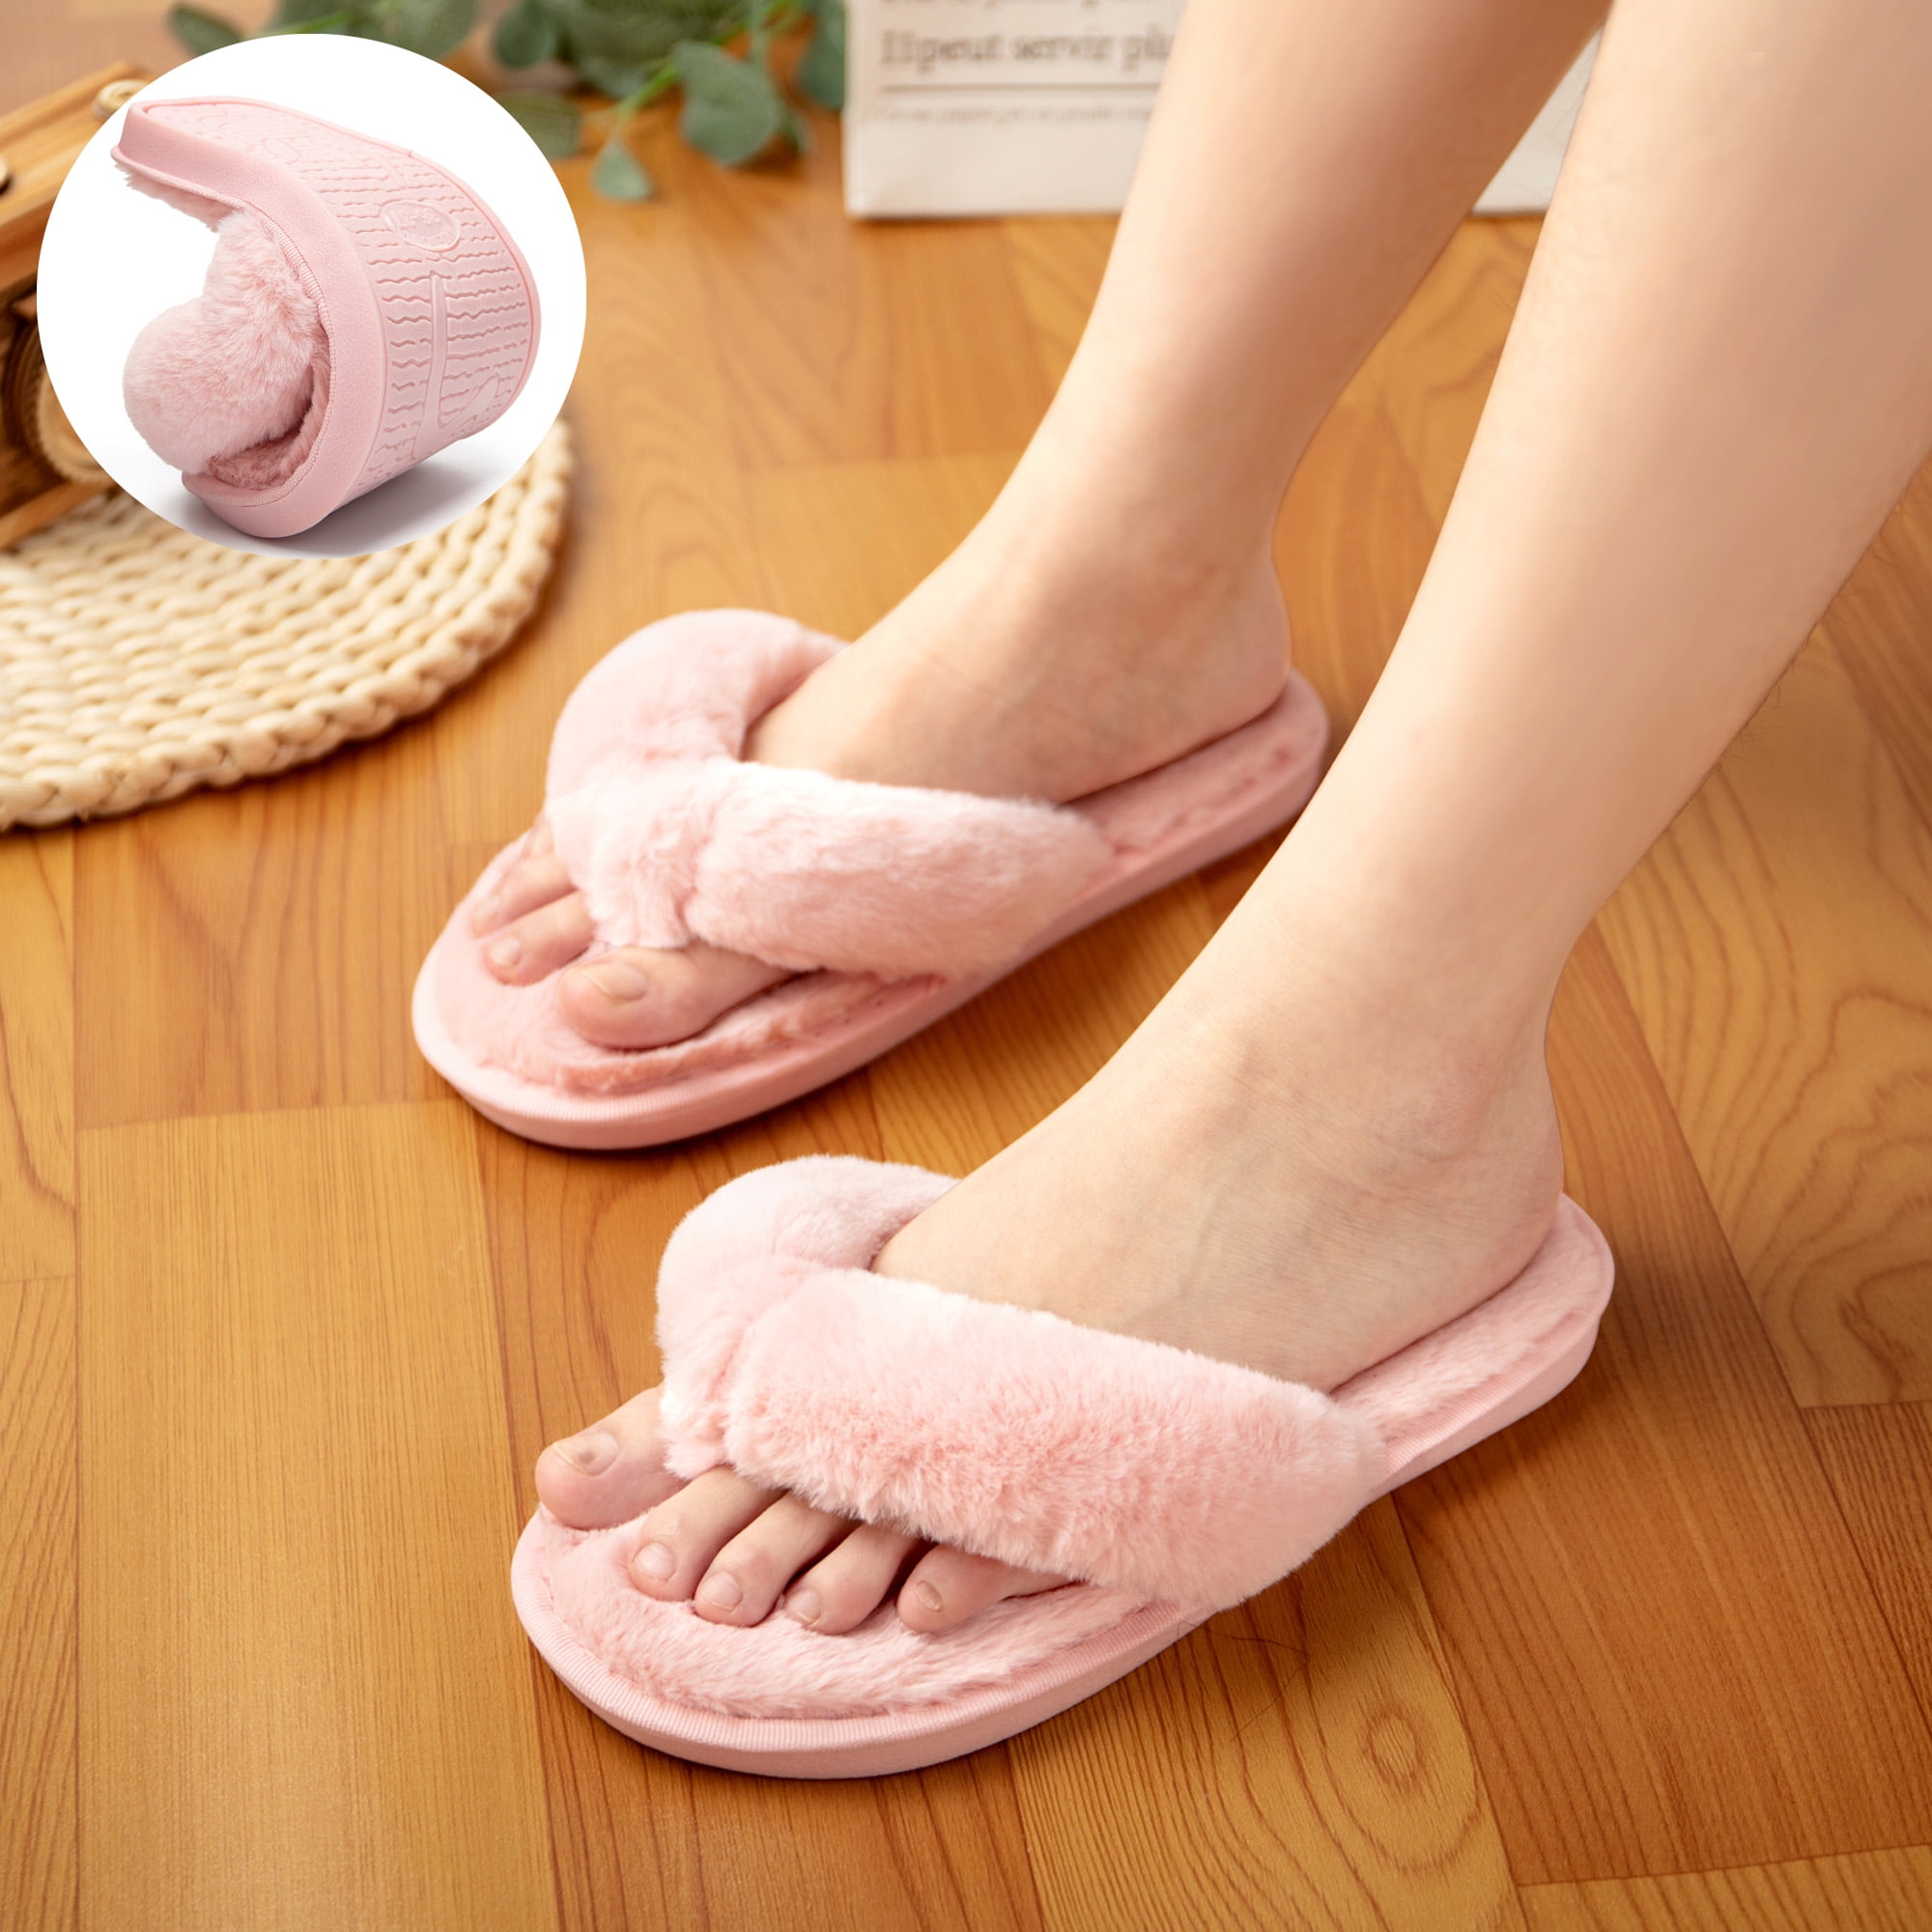 DODOING Women's Memory Foam Flip Flop House Indoor Slippers with Cozy Short  Plush Lining, Spa Thong Sandals Slippersm, Black/ Grey/ Pink